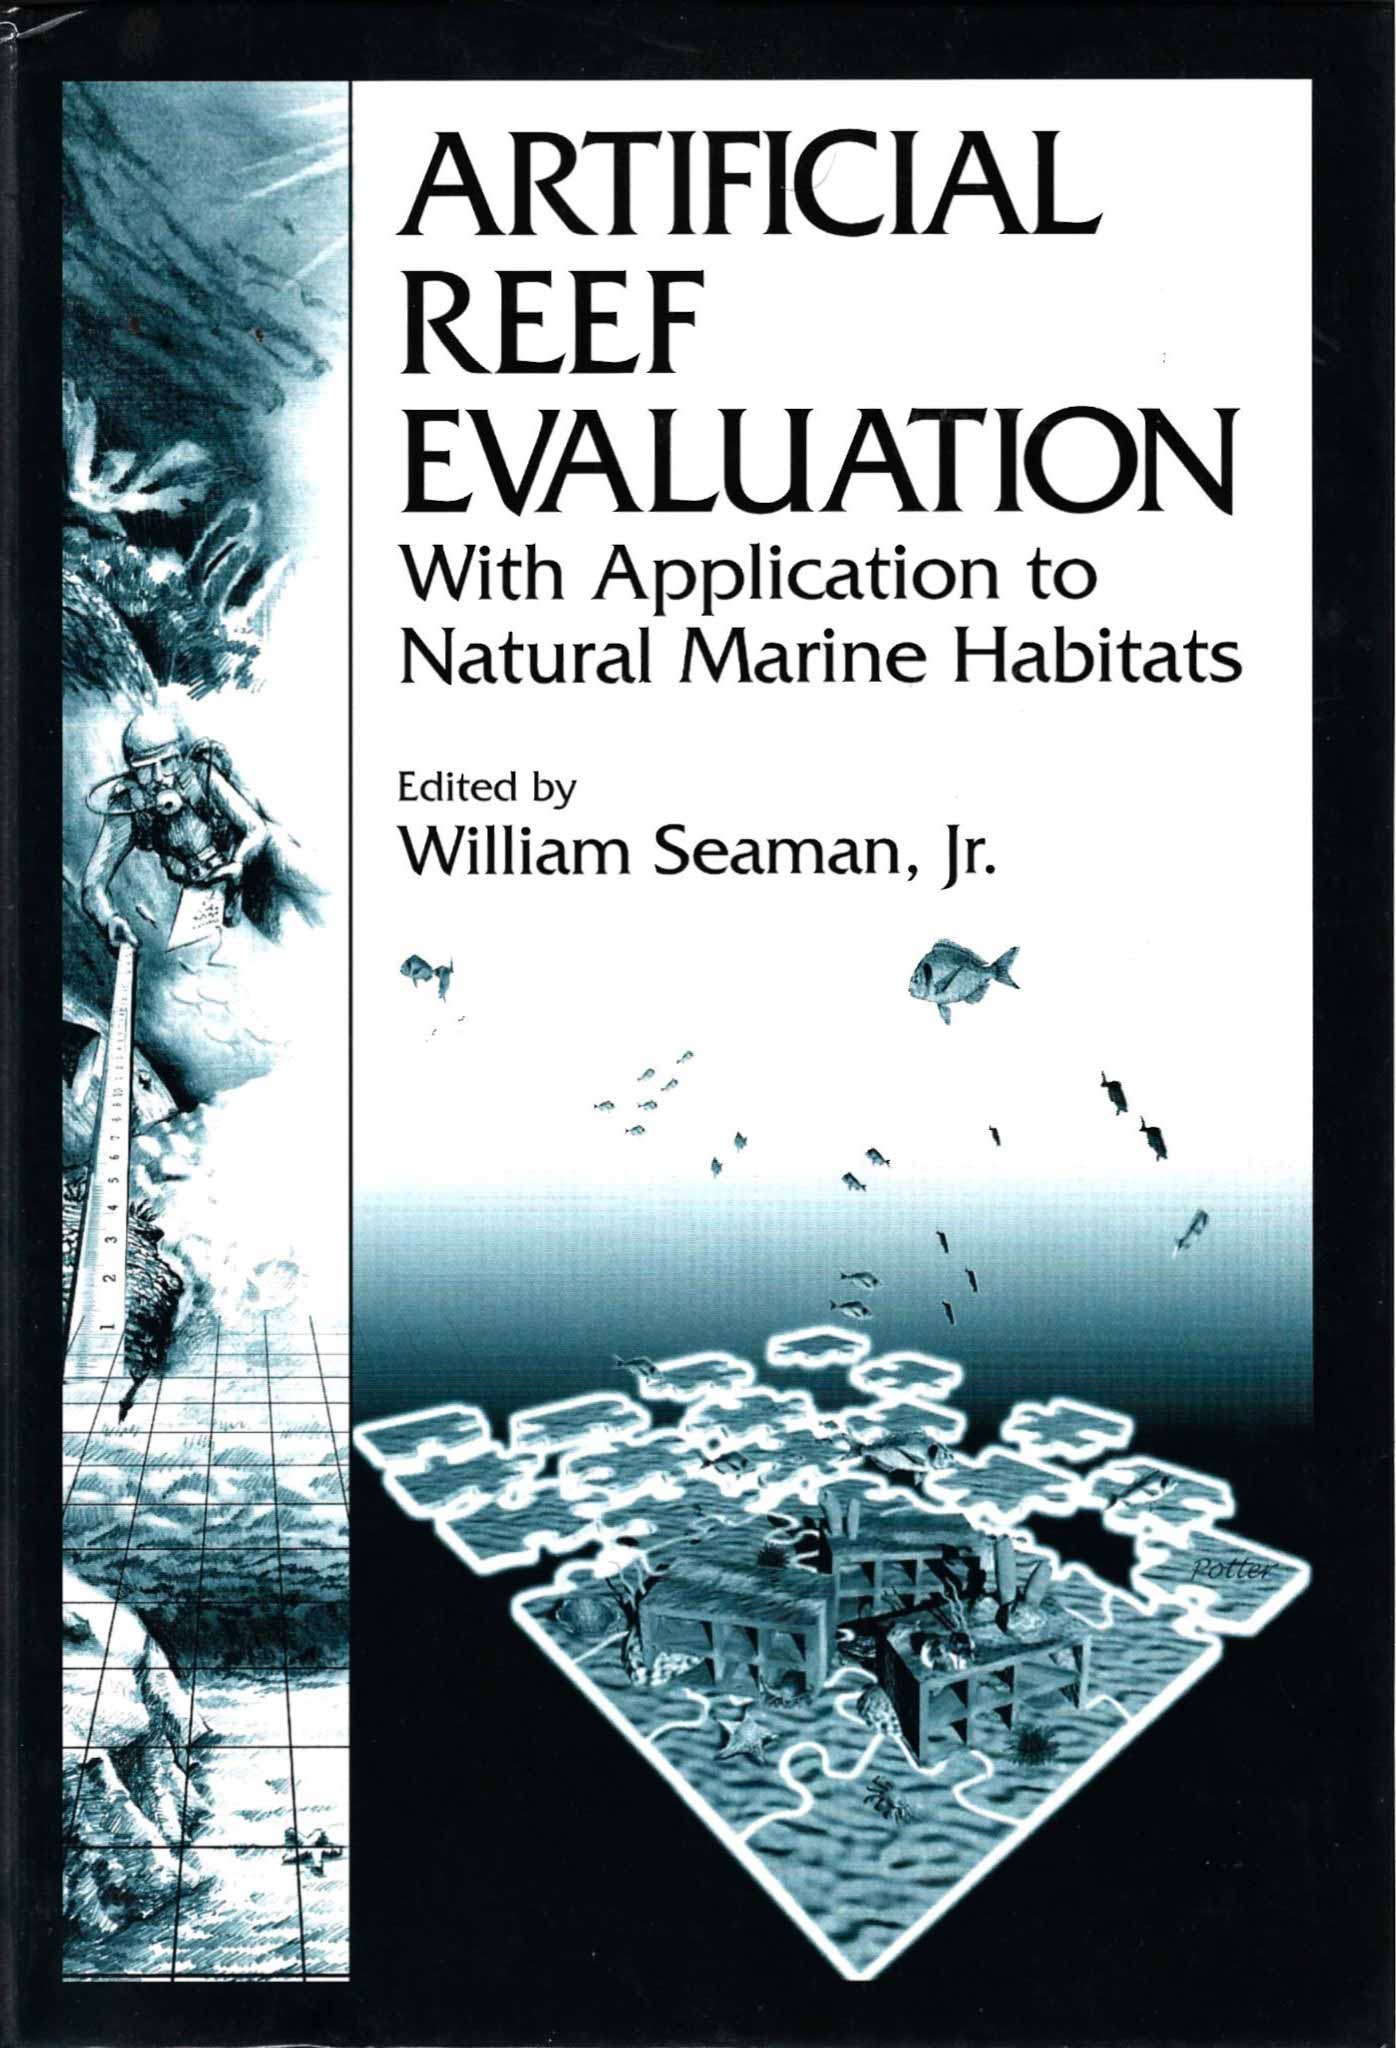 Artificial Reef Book Cover from SeaGrant